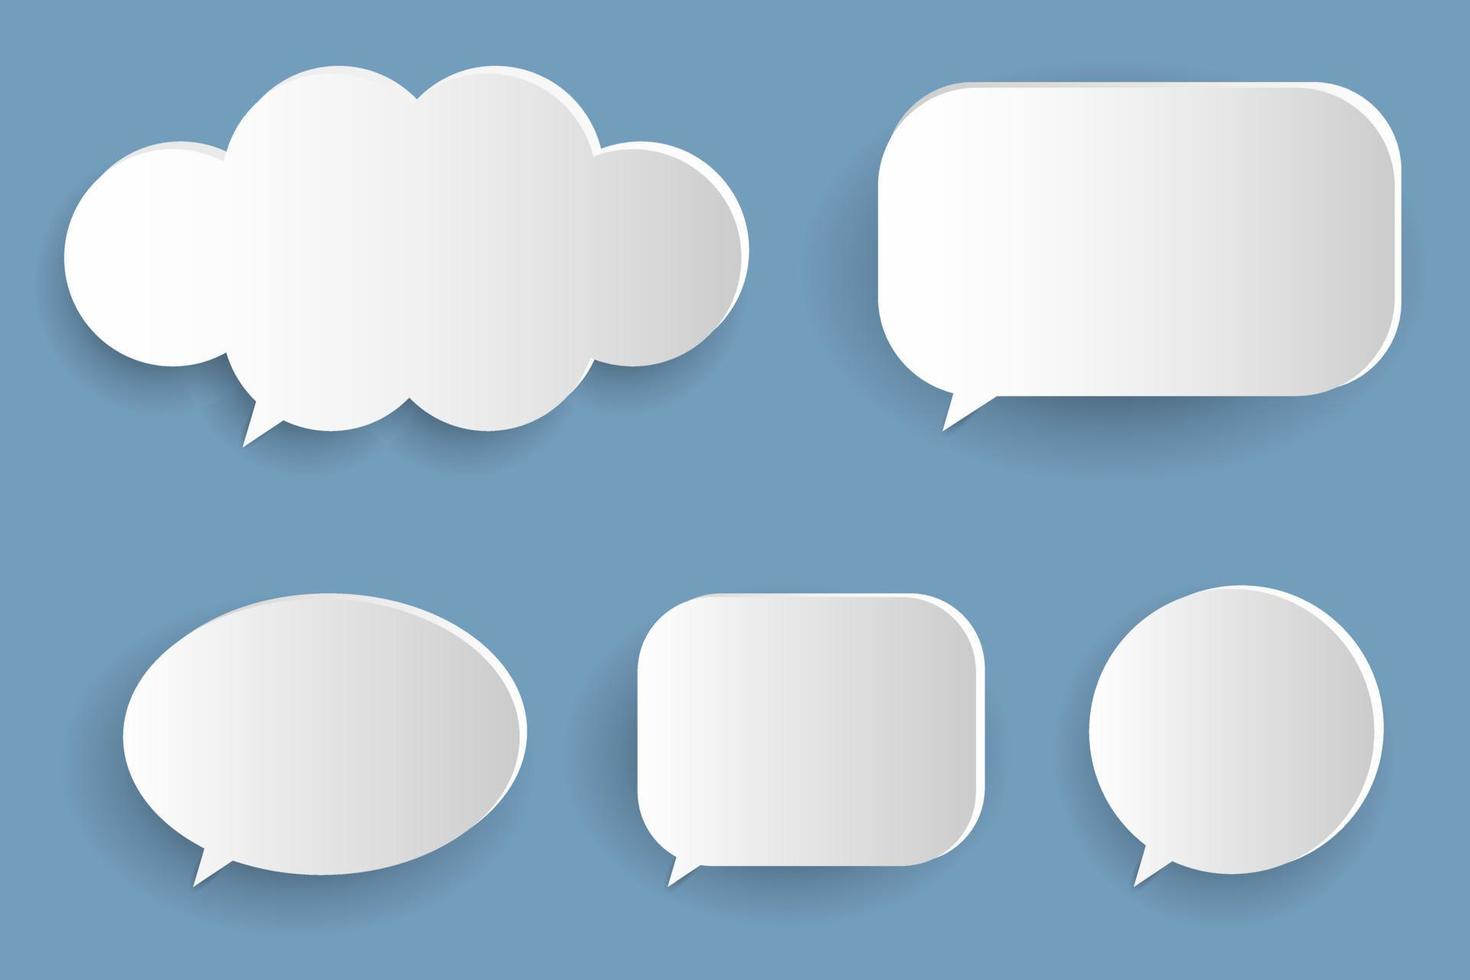 blank 3d speech bubbles, icon set poster and banner concept on soft blue background vector